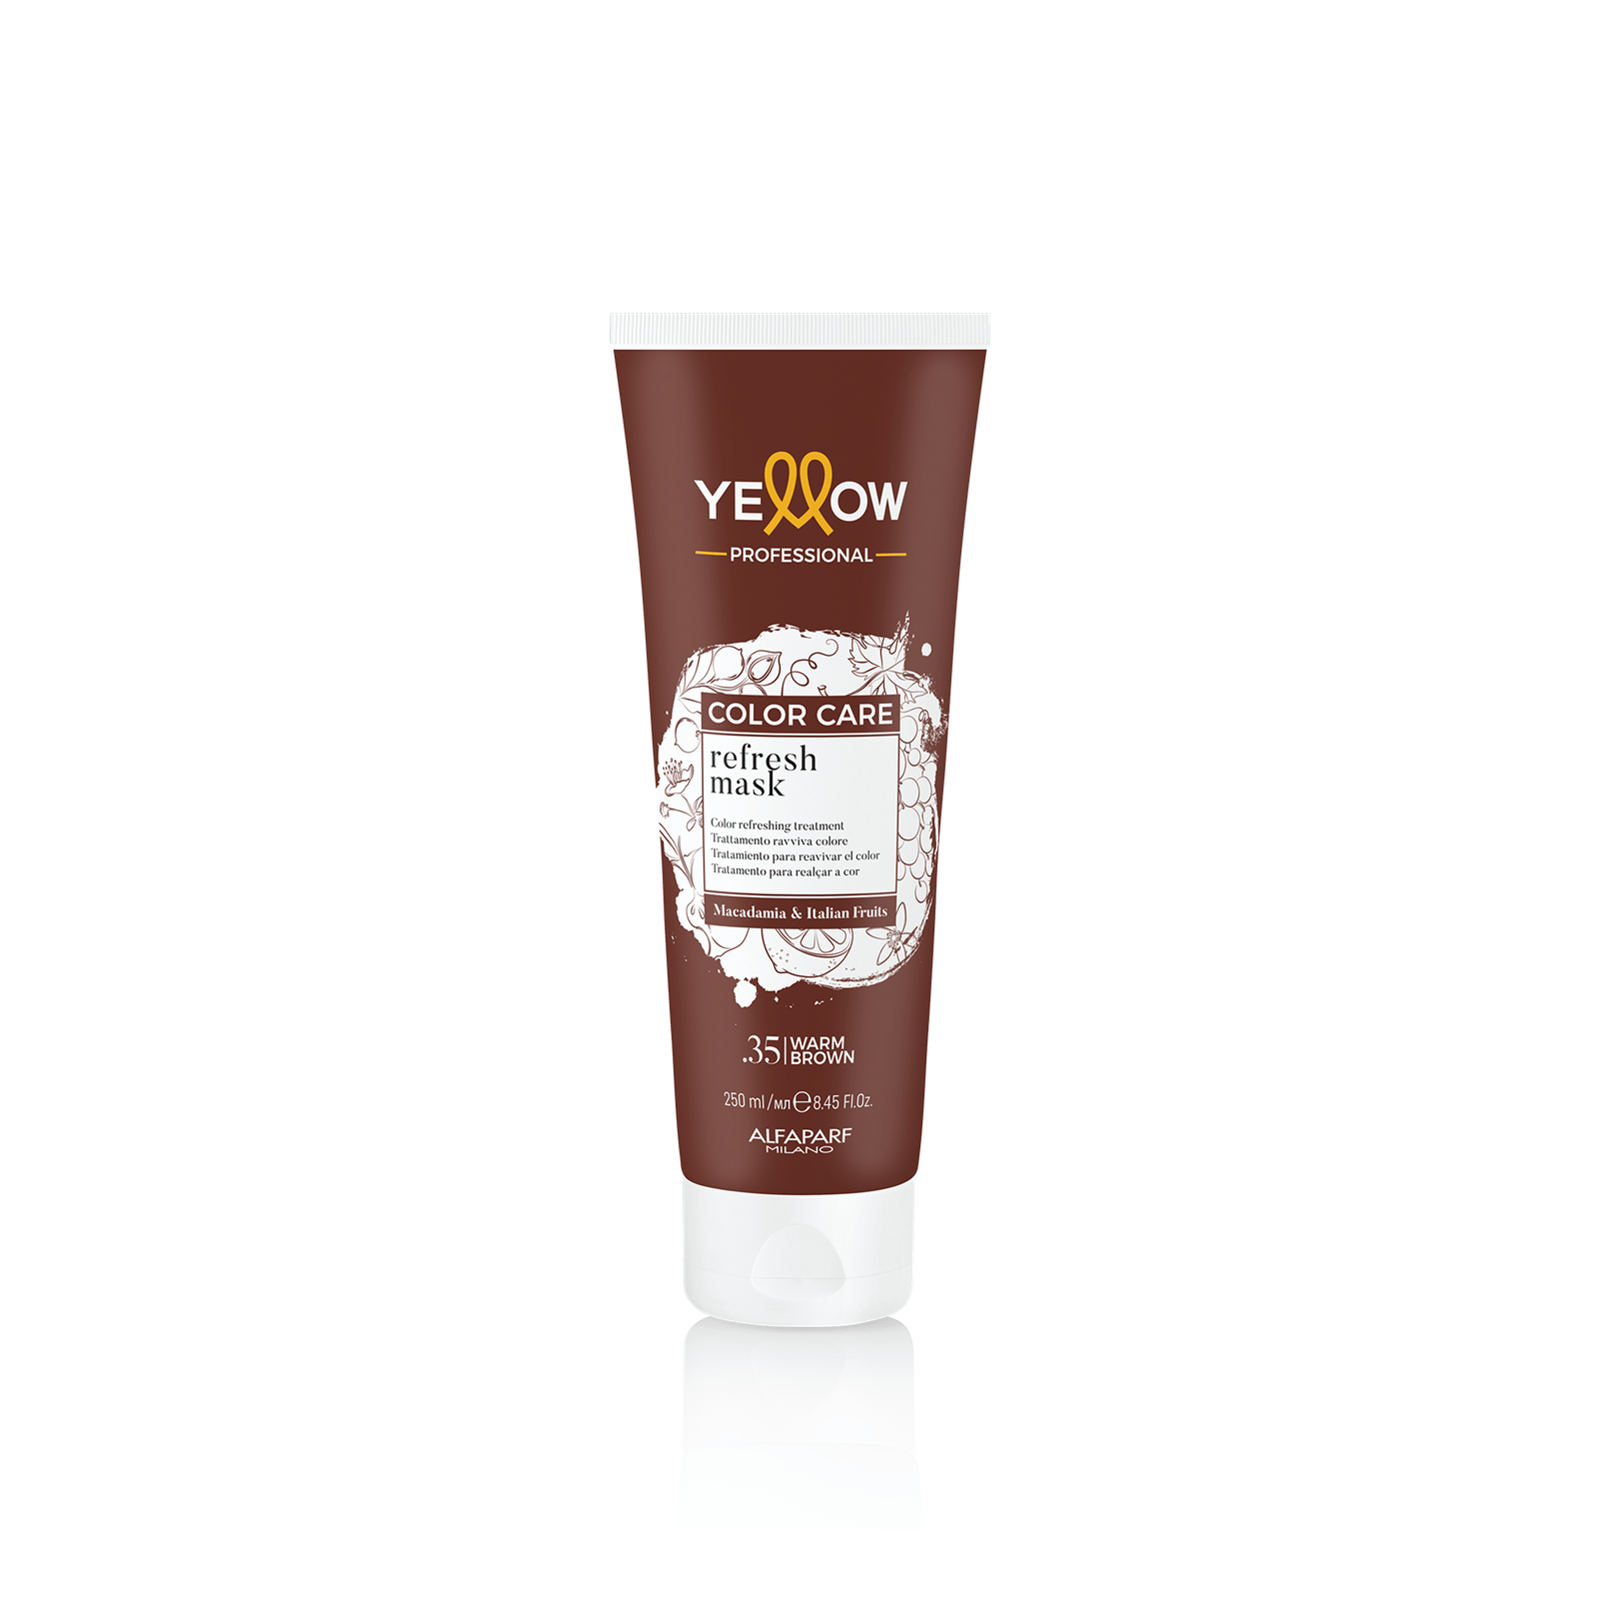 Yellow Professional Color Care Refresh Mask .35 Warm Brown 250ml (8.45 fl oz)